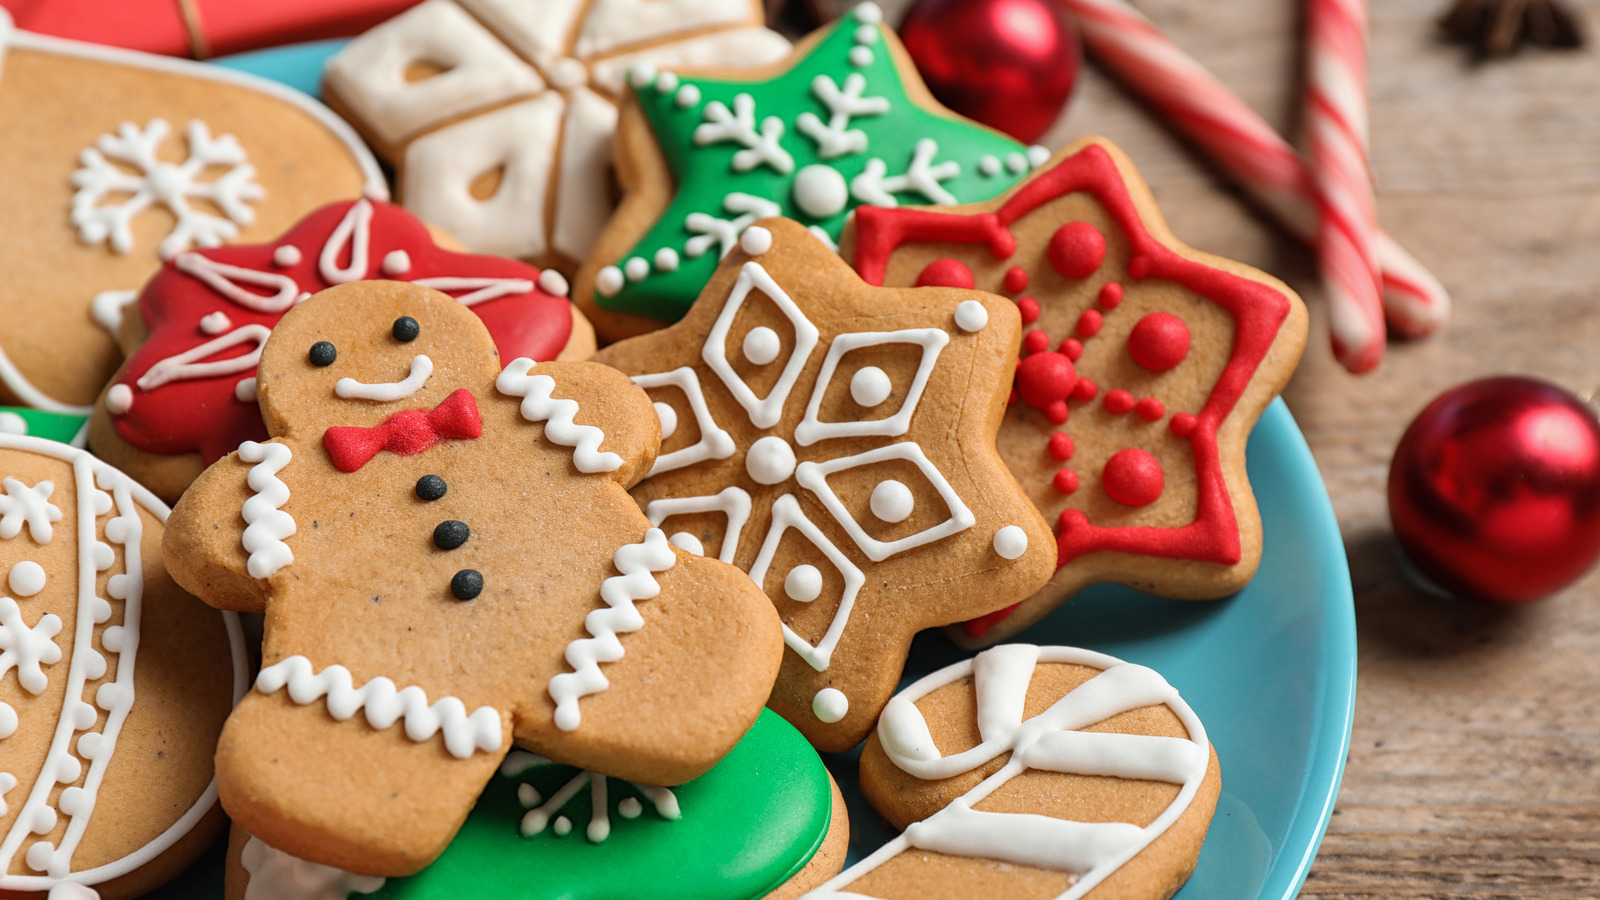 Can I Guess Mood You Are in RN by Foods You Wanna Have? Quiz Holiday cookies